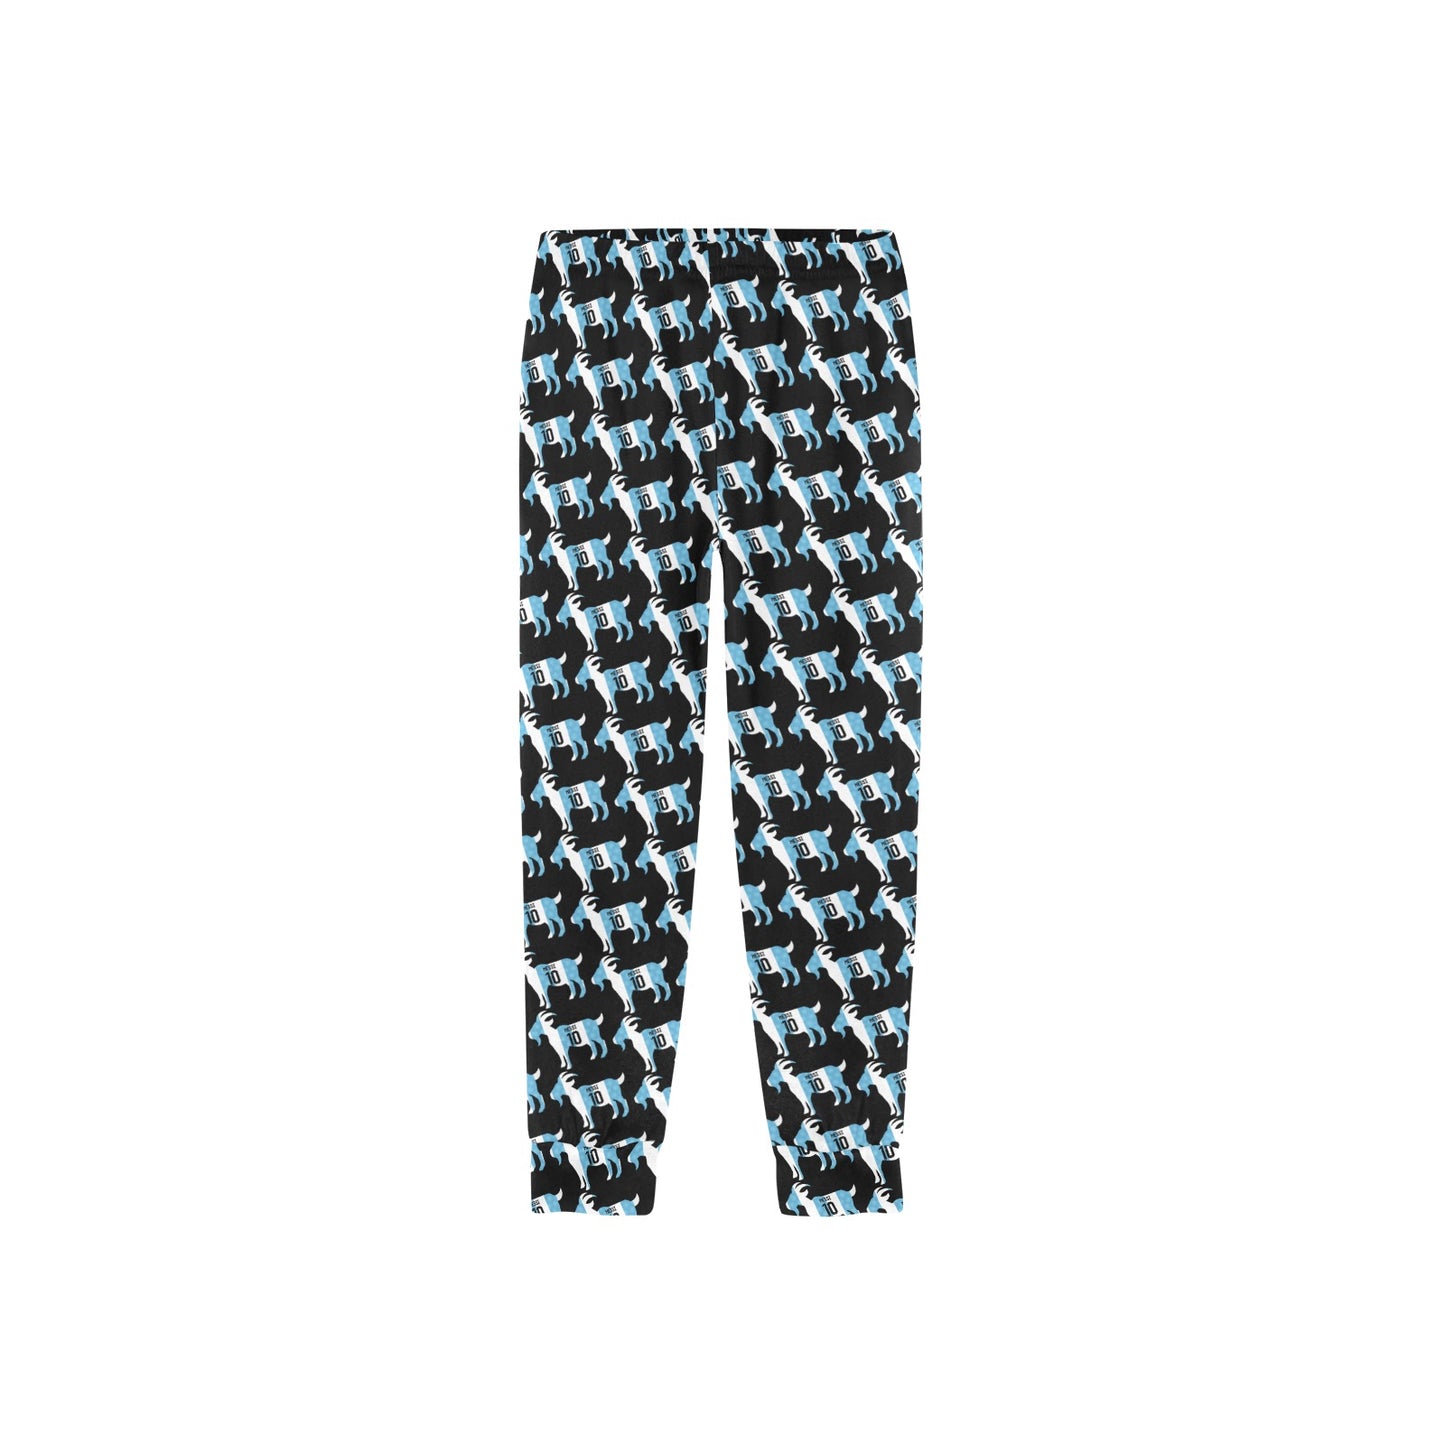 GOAT Lionel Messi •  Soccer Pajama Pants • Trouser Pajamas Pants for Kids • Birthday Gift